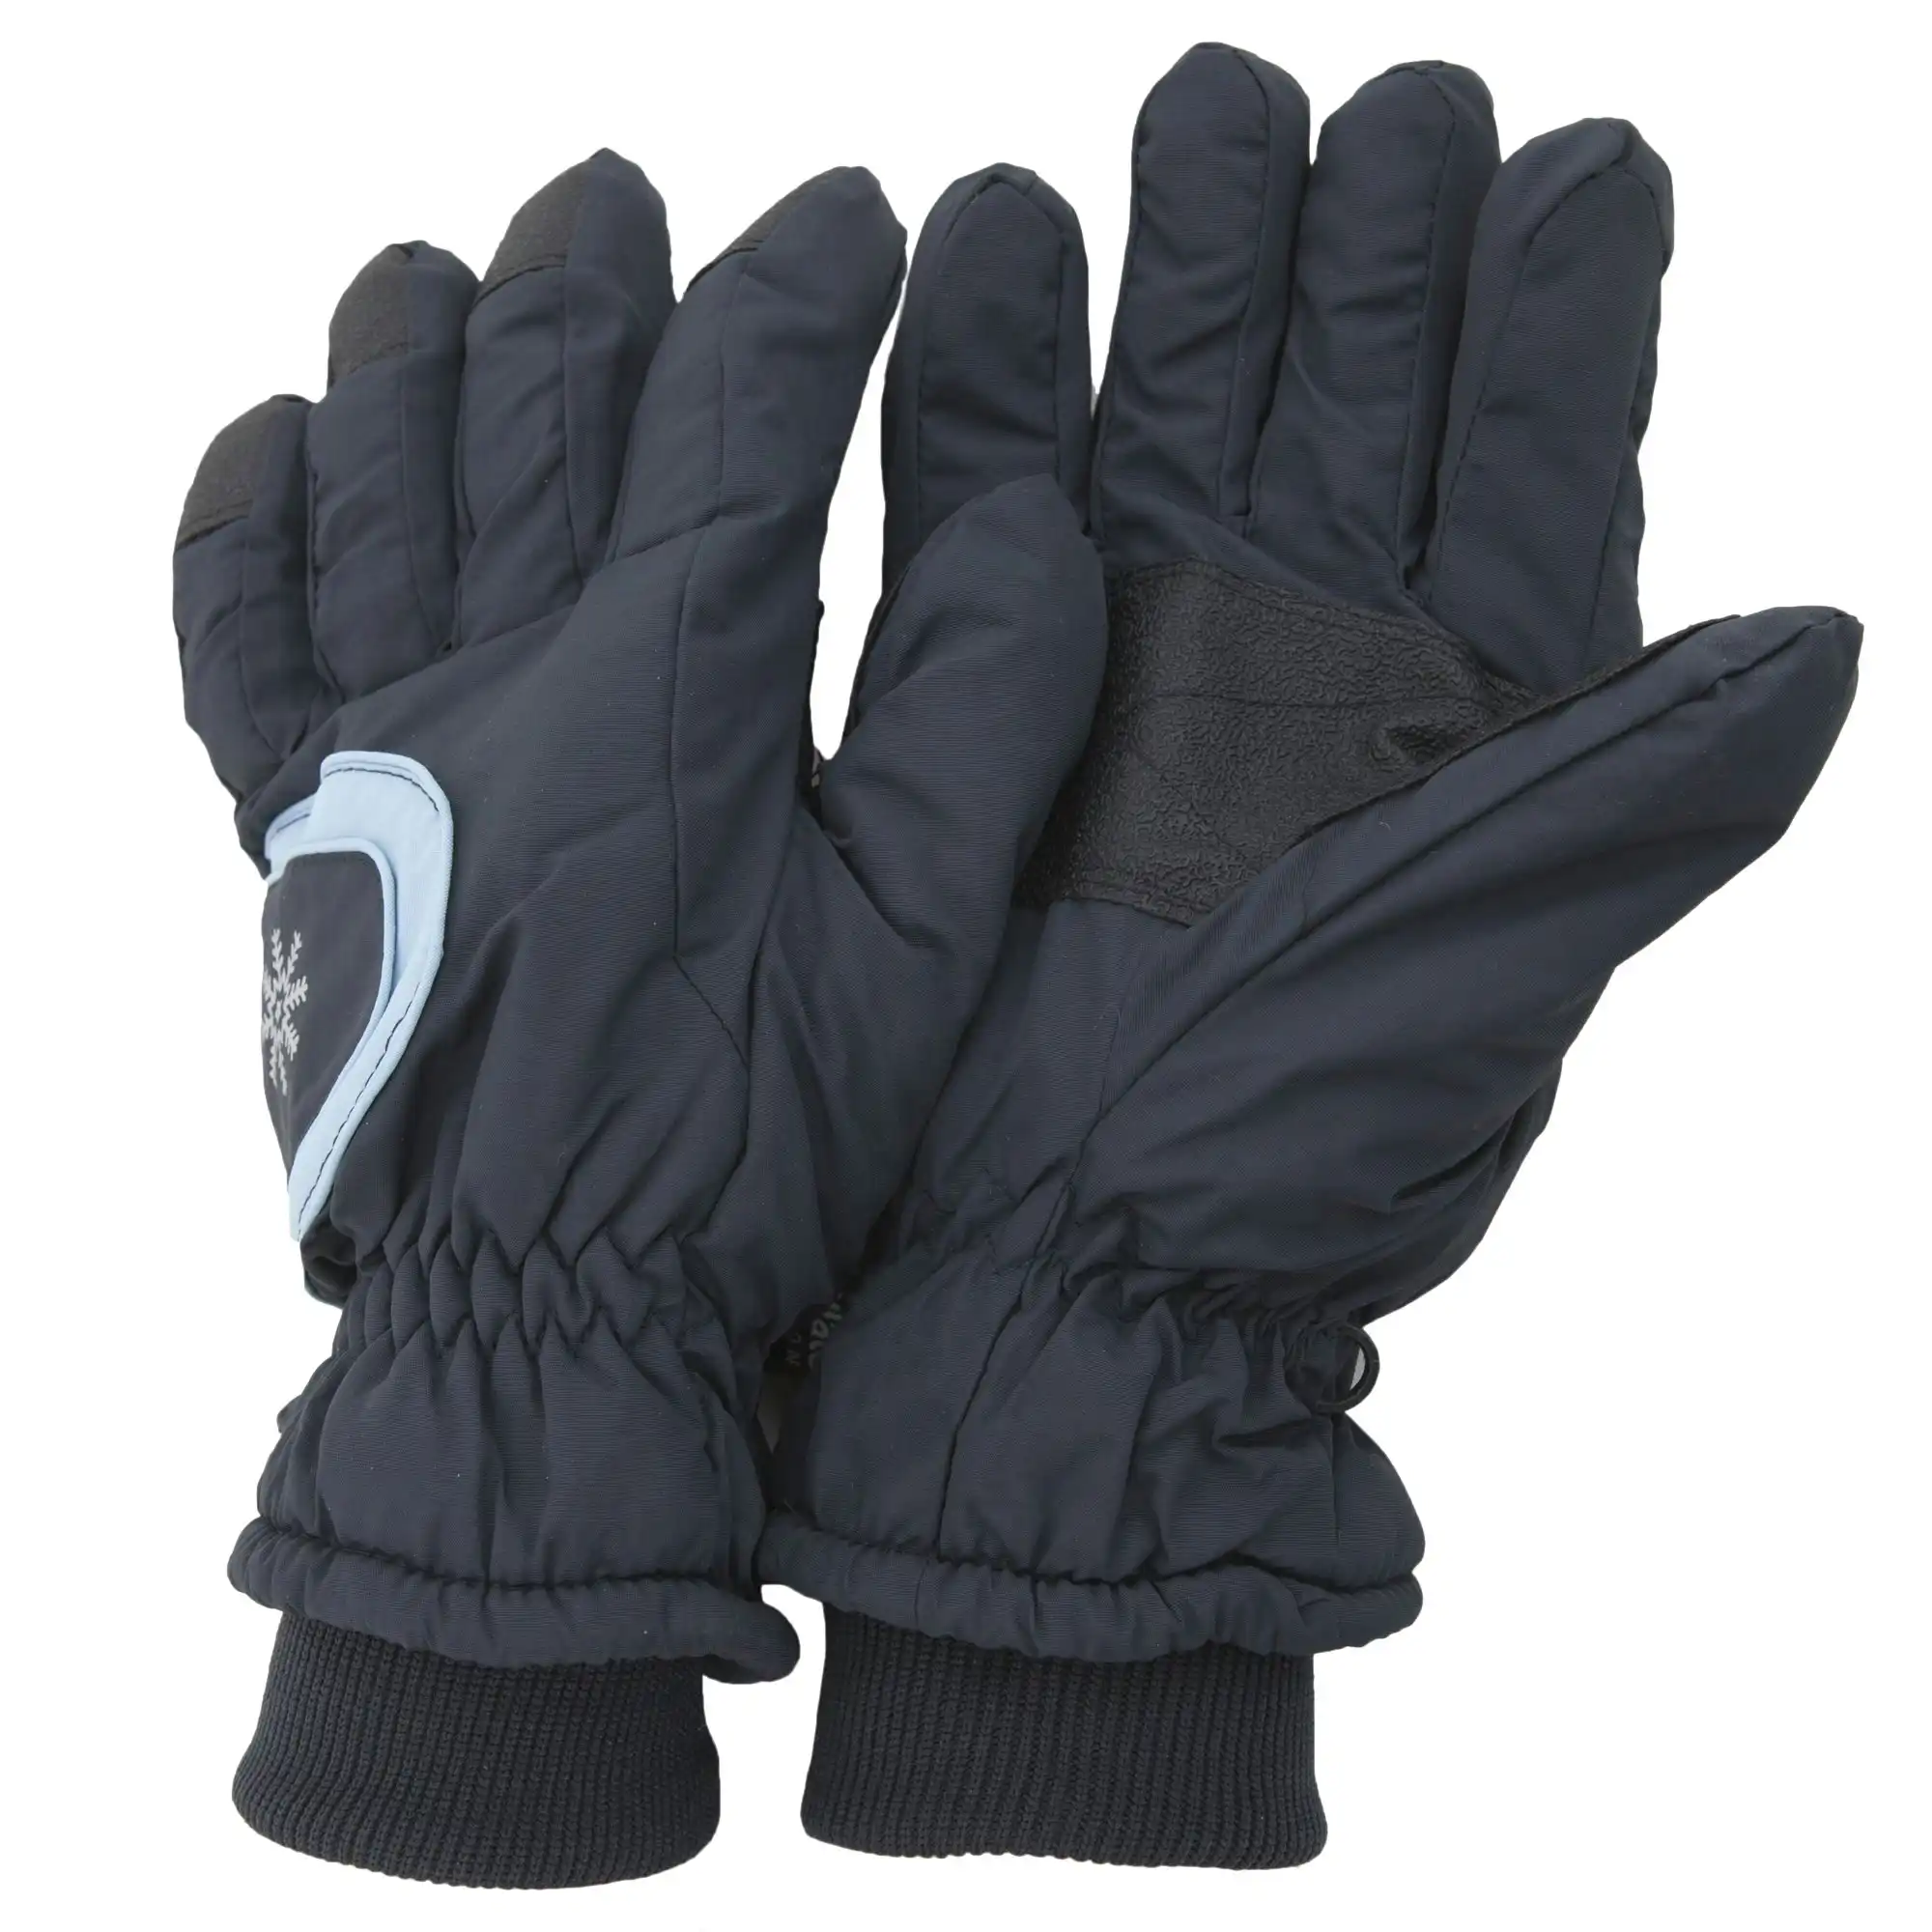 Floso Ladies/Womens Thinsulate Extra Warm Thermal Padded Winter/Ski Gloves With Palm Grip (3M 40g)